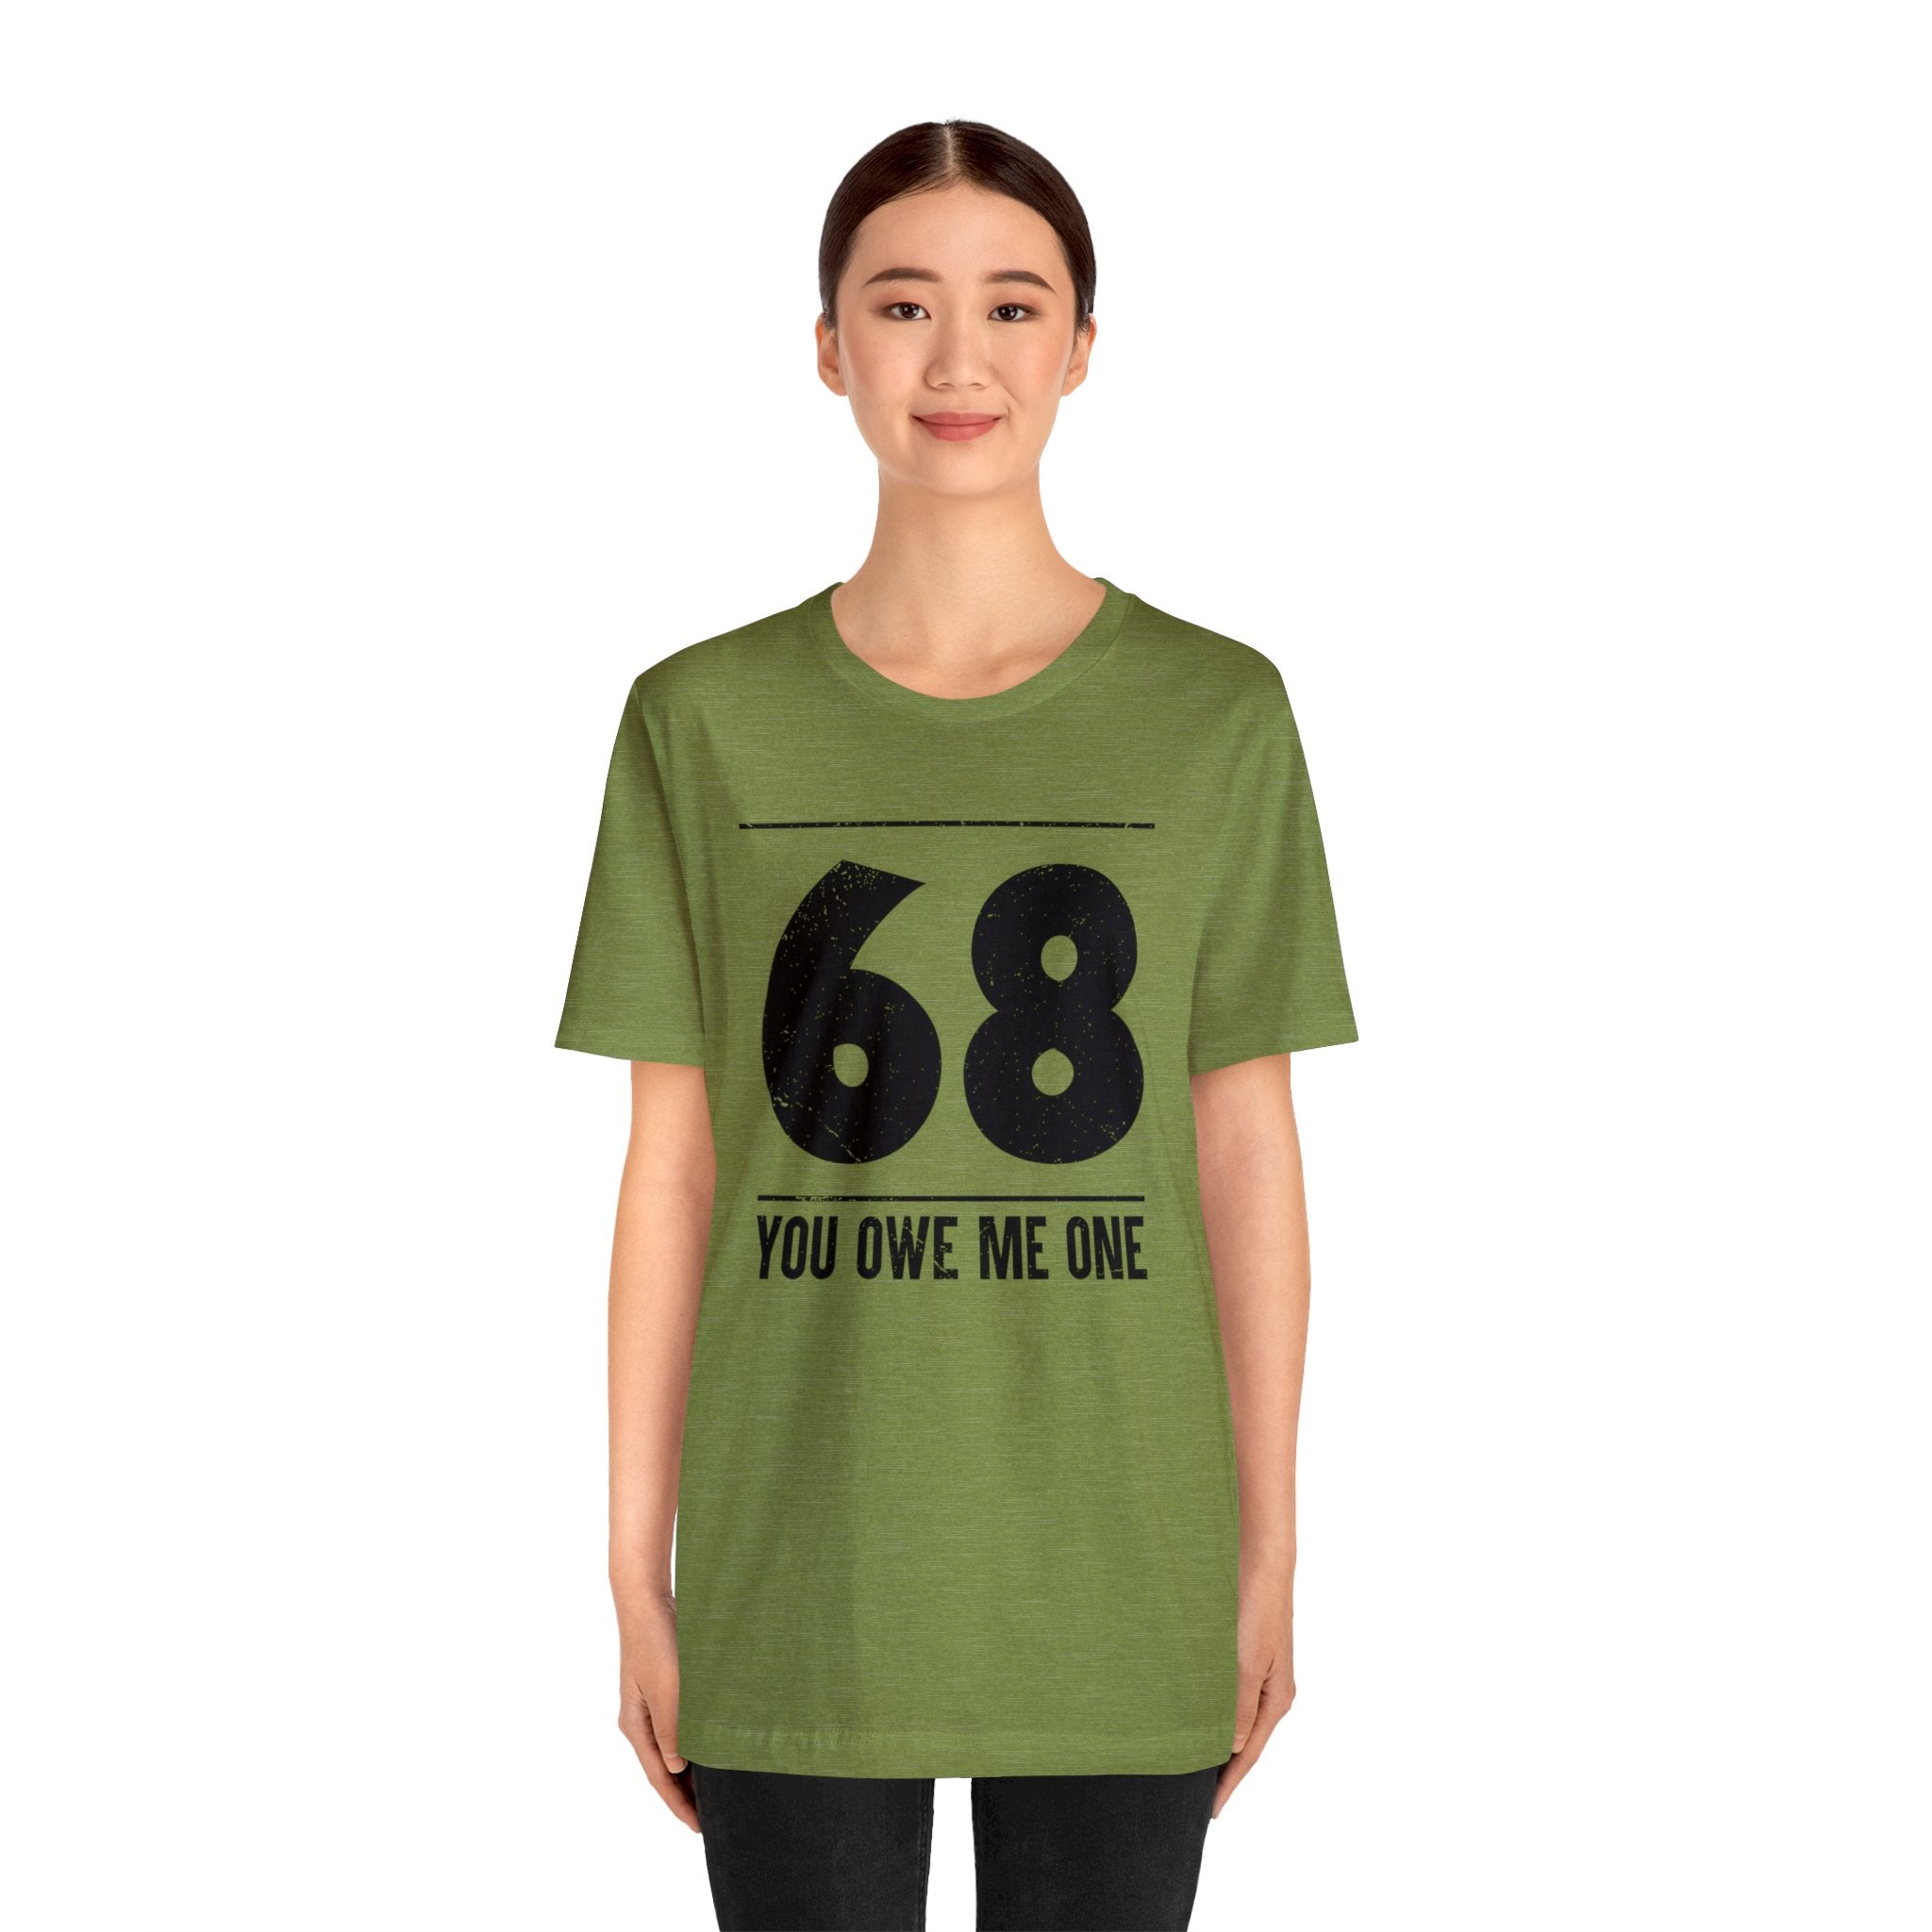 A woman in a geeky green shirt that says "68 You Owe Me One".